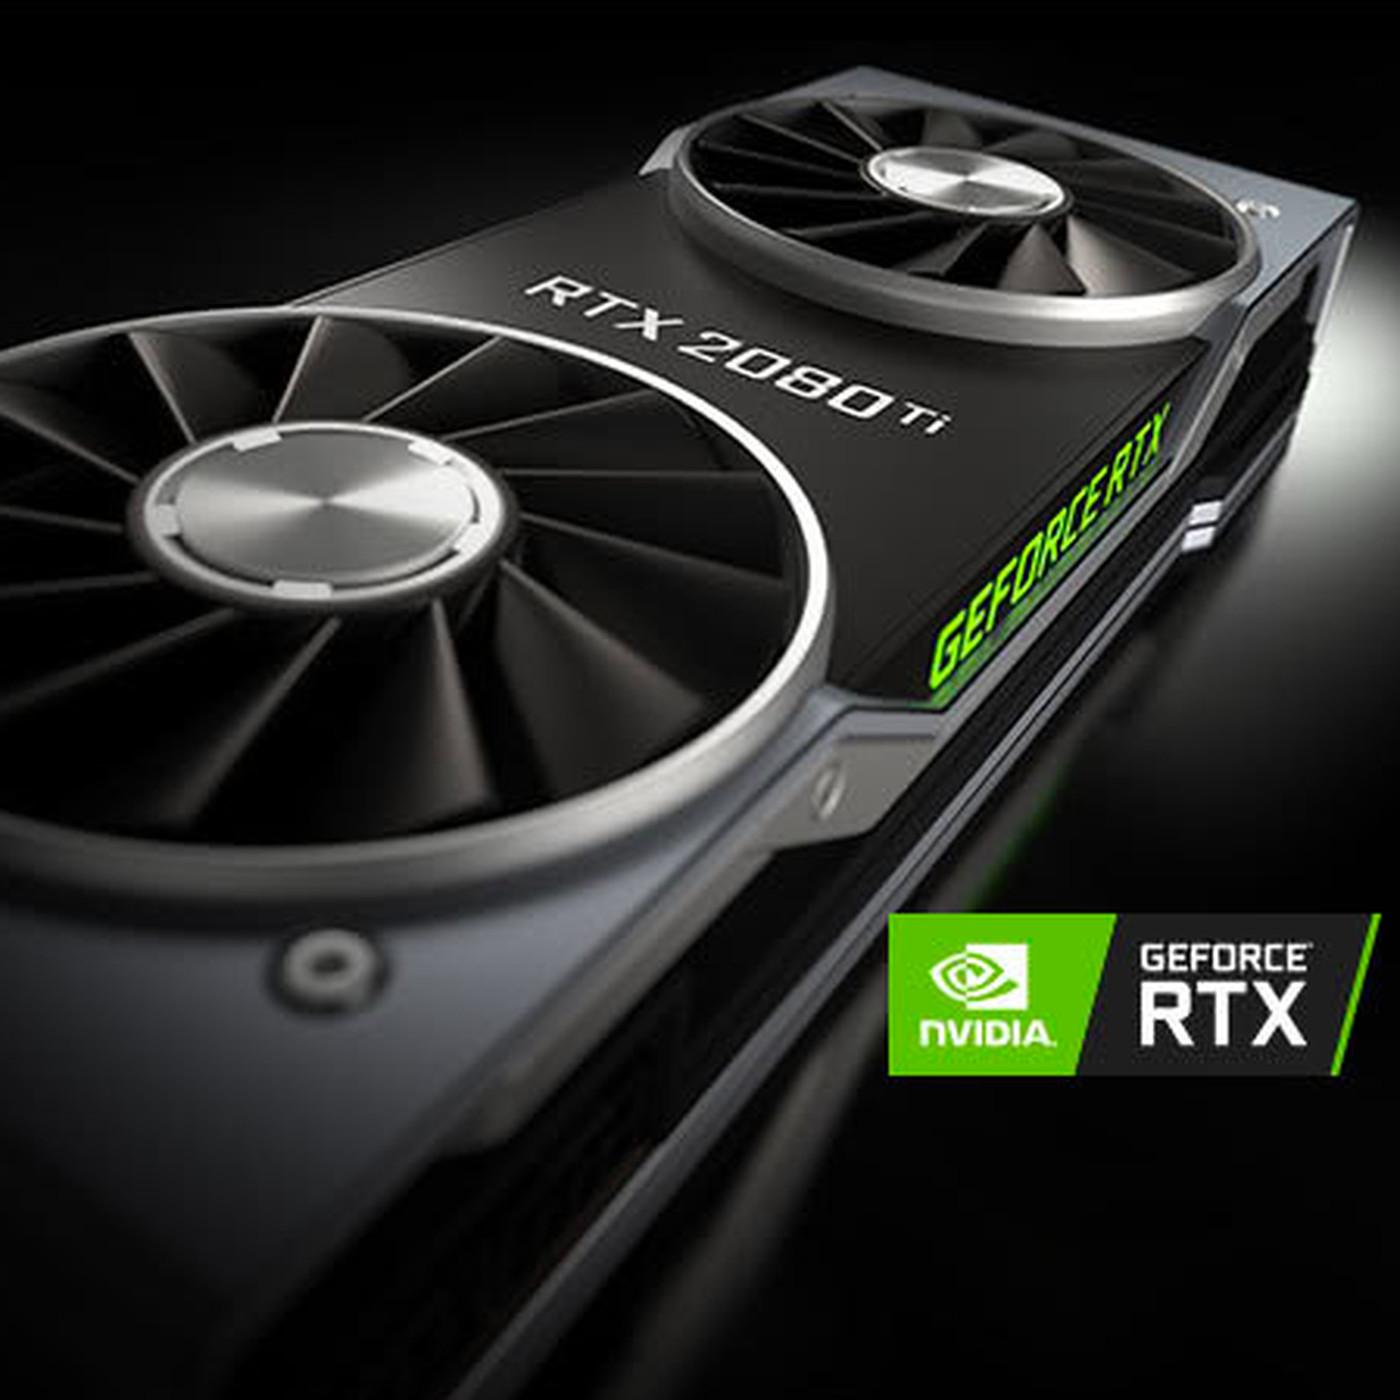 Nvidia announces RTX 2000 GPU series with '6 times more performance